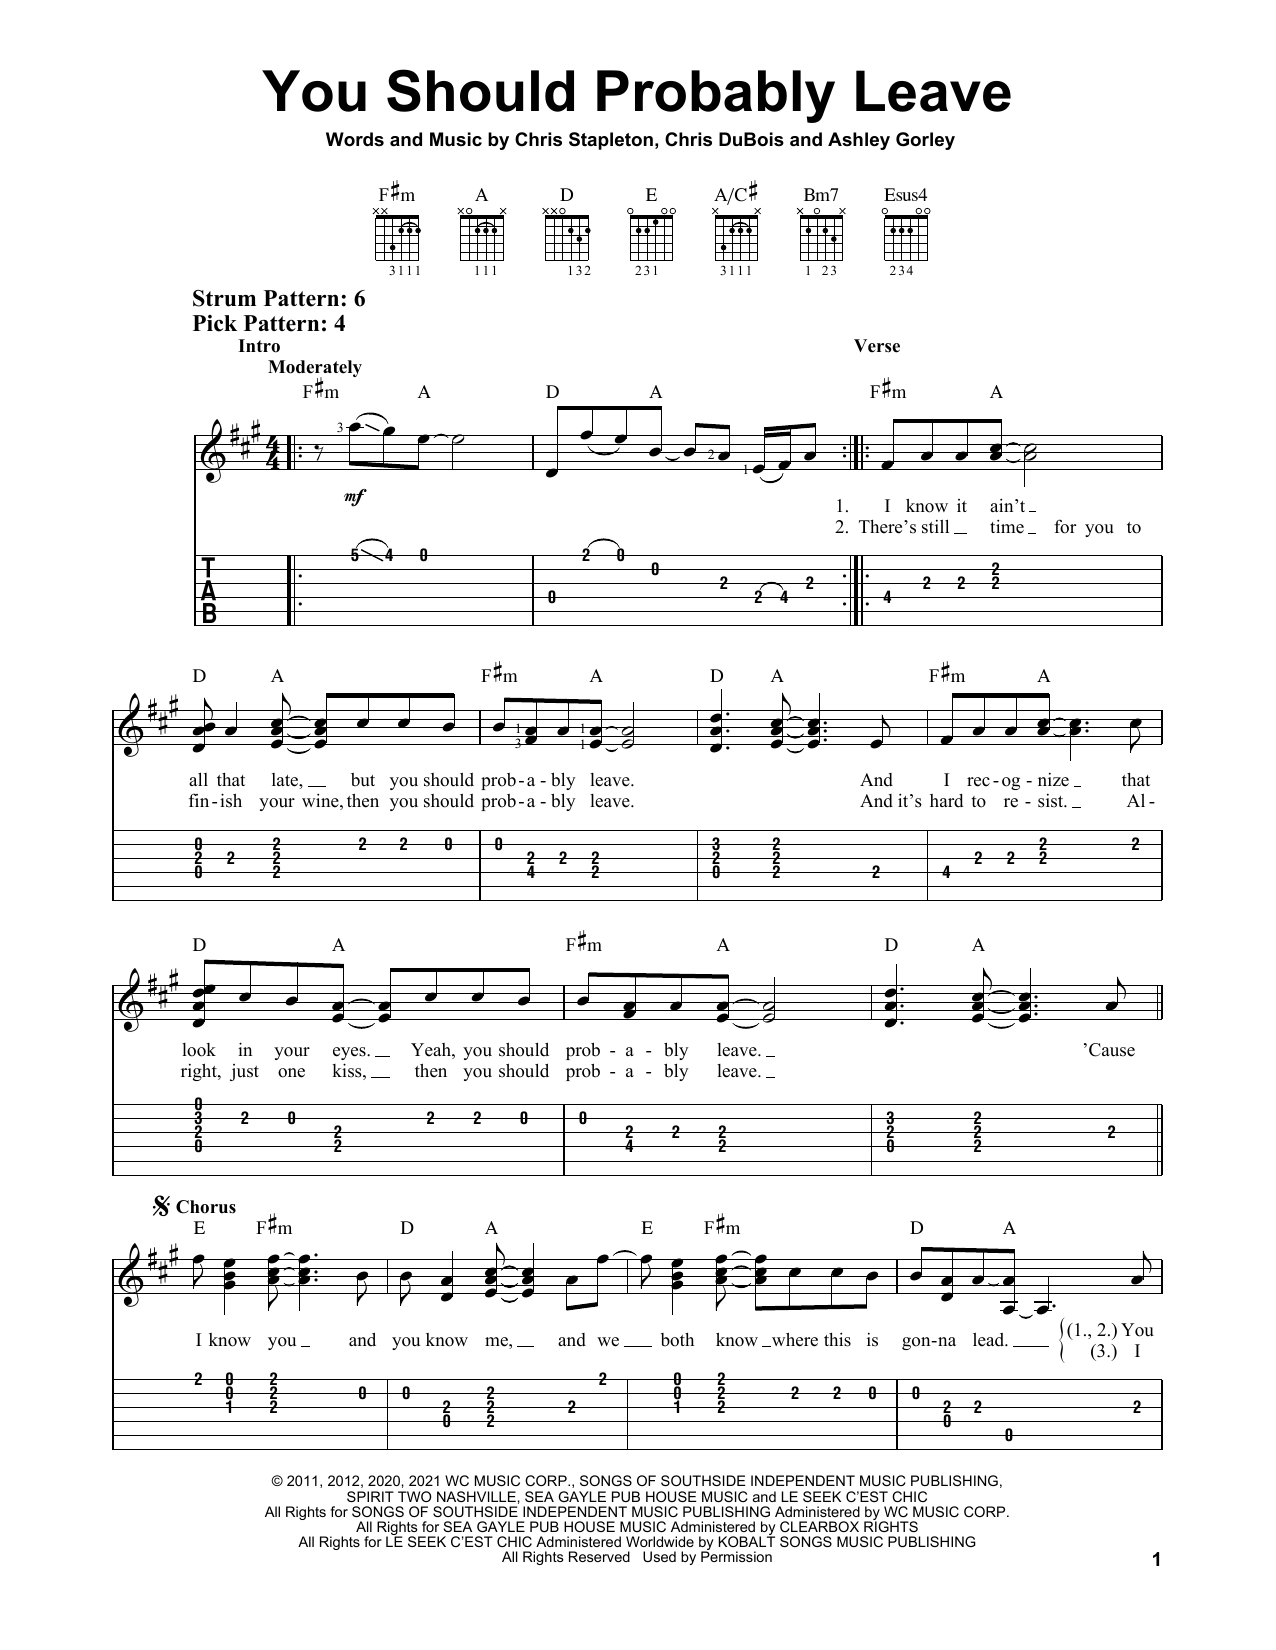 Download Chris Stapleton You Should Probably Leave Sheet Music